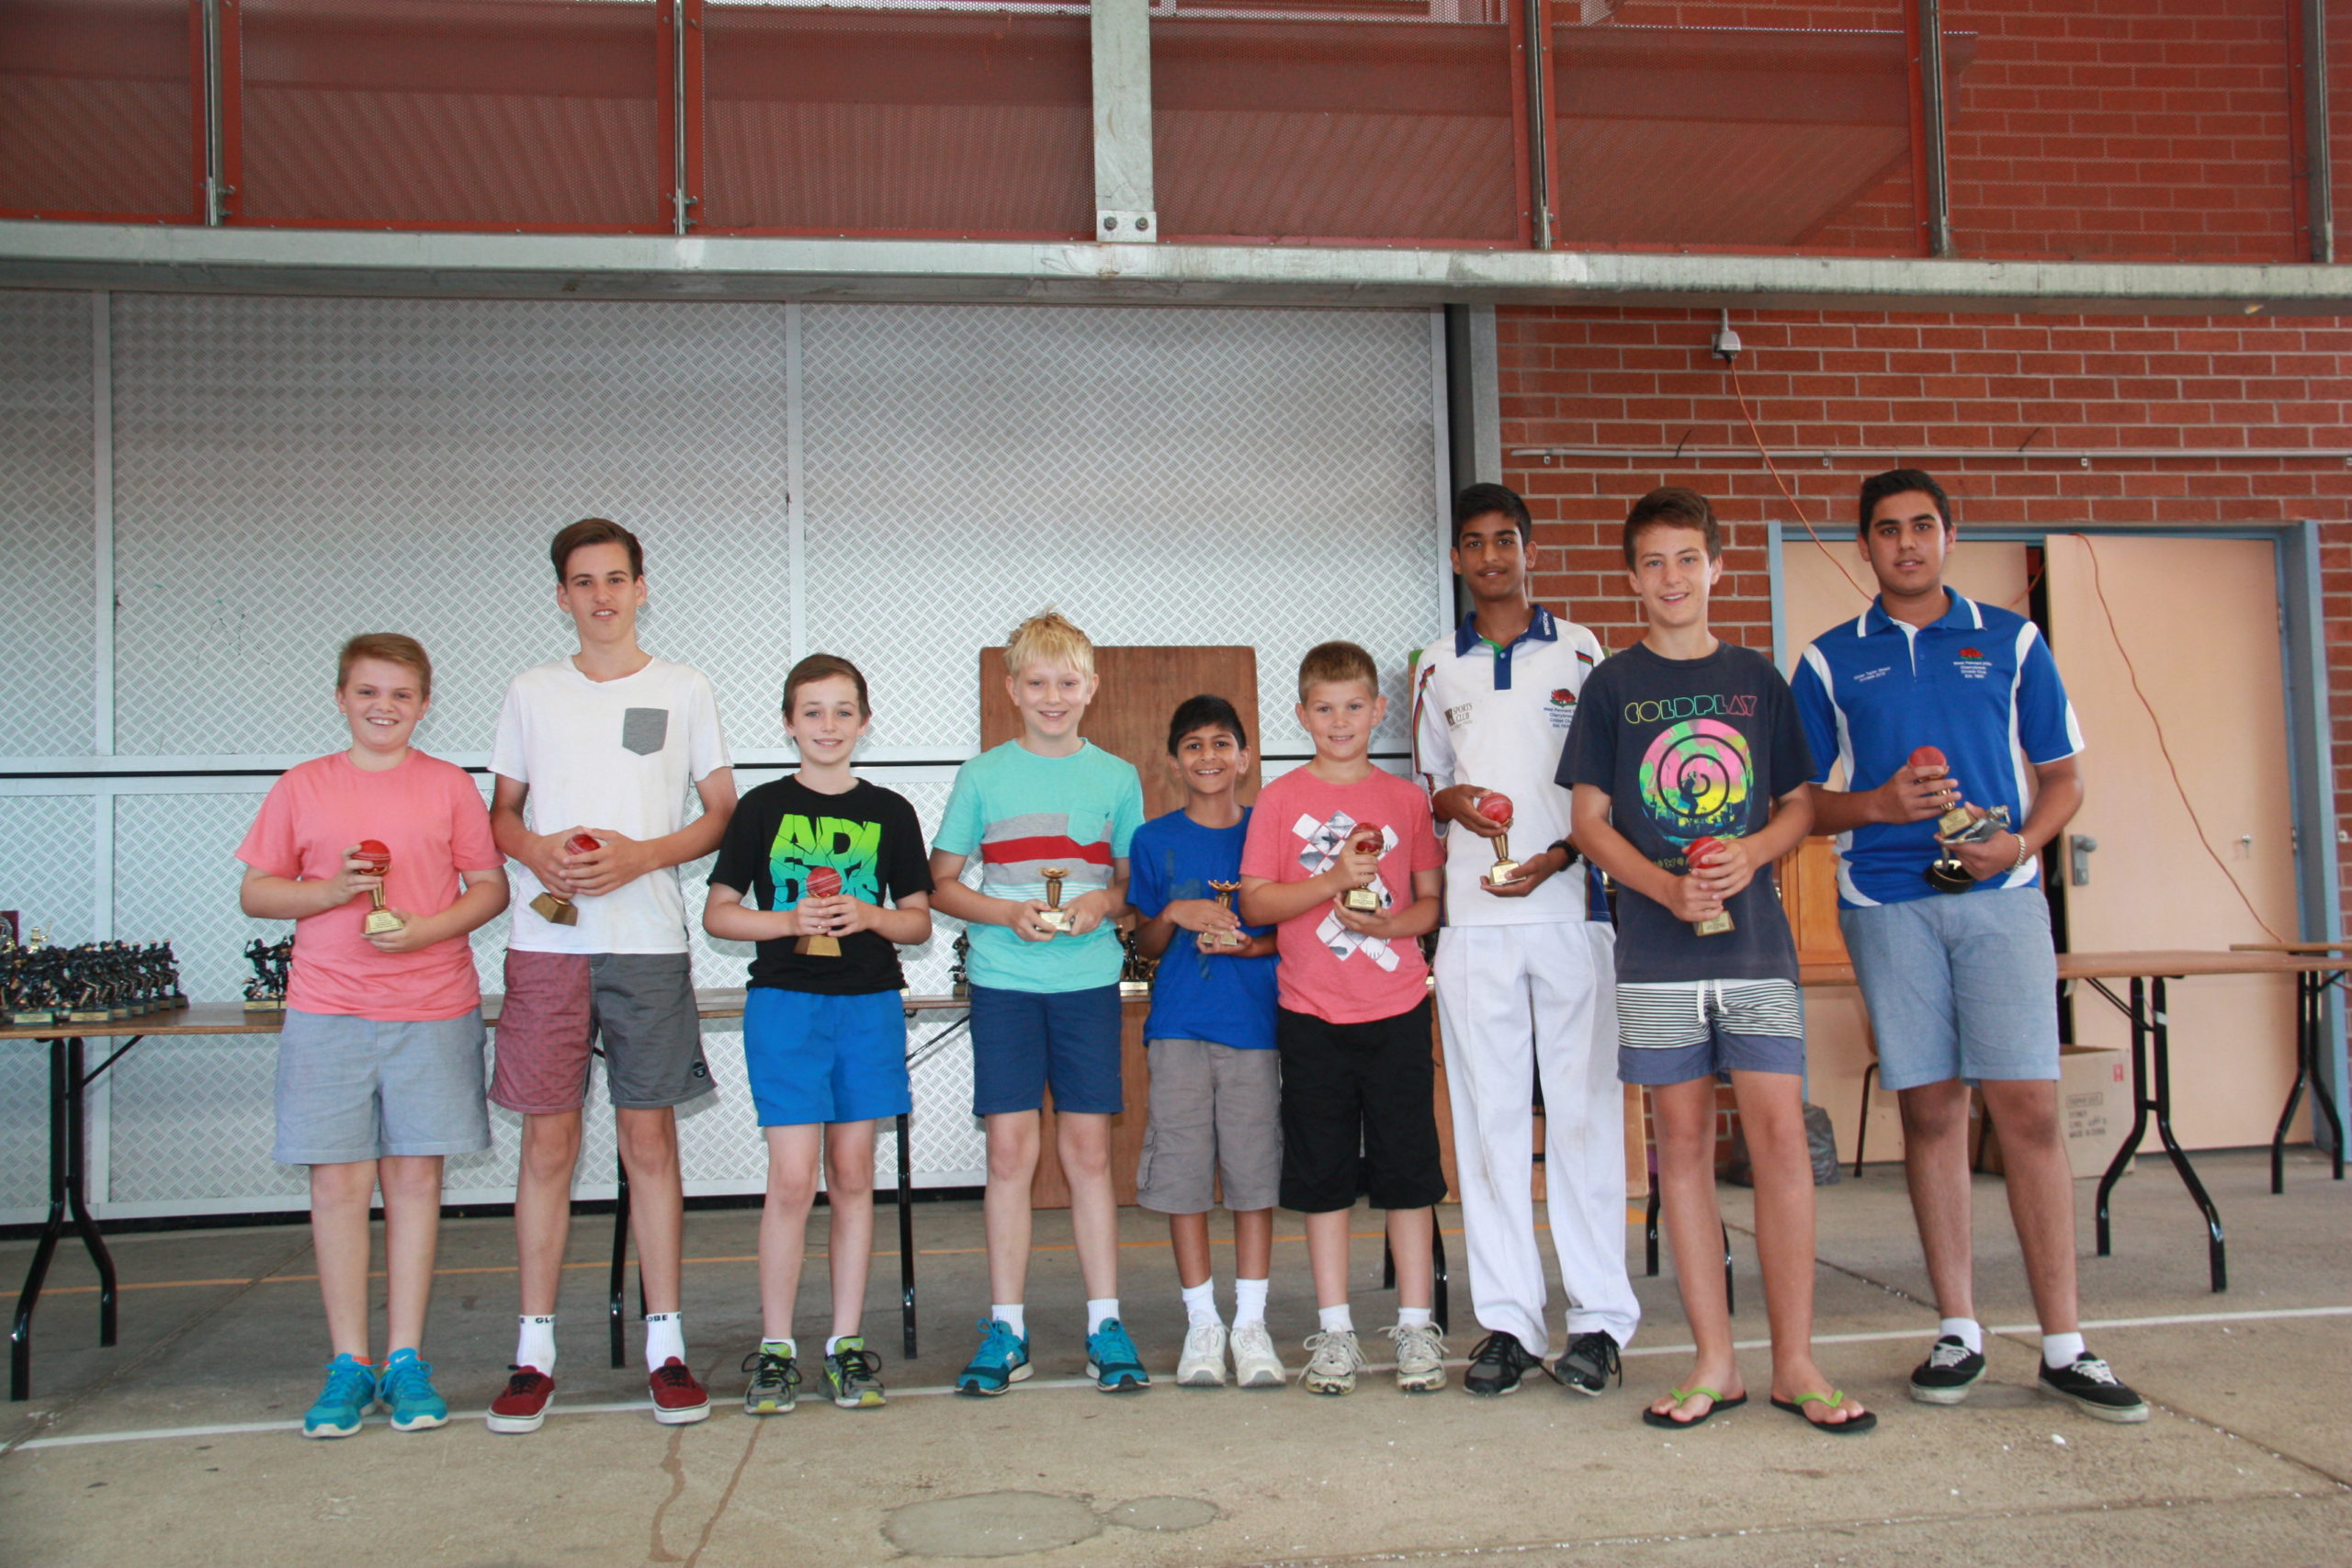 5 wickets and hat-tricks - Junior Presentation Day @ Oakhill Drive Public School 15 March 2014.